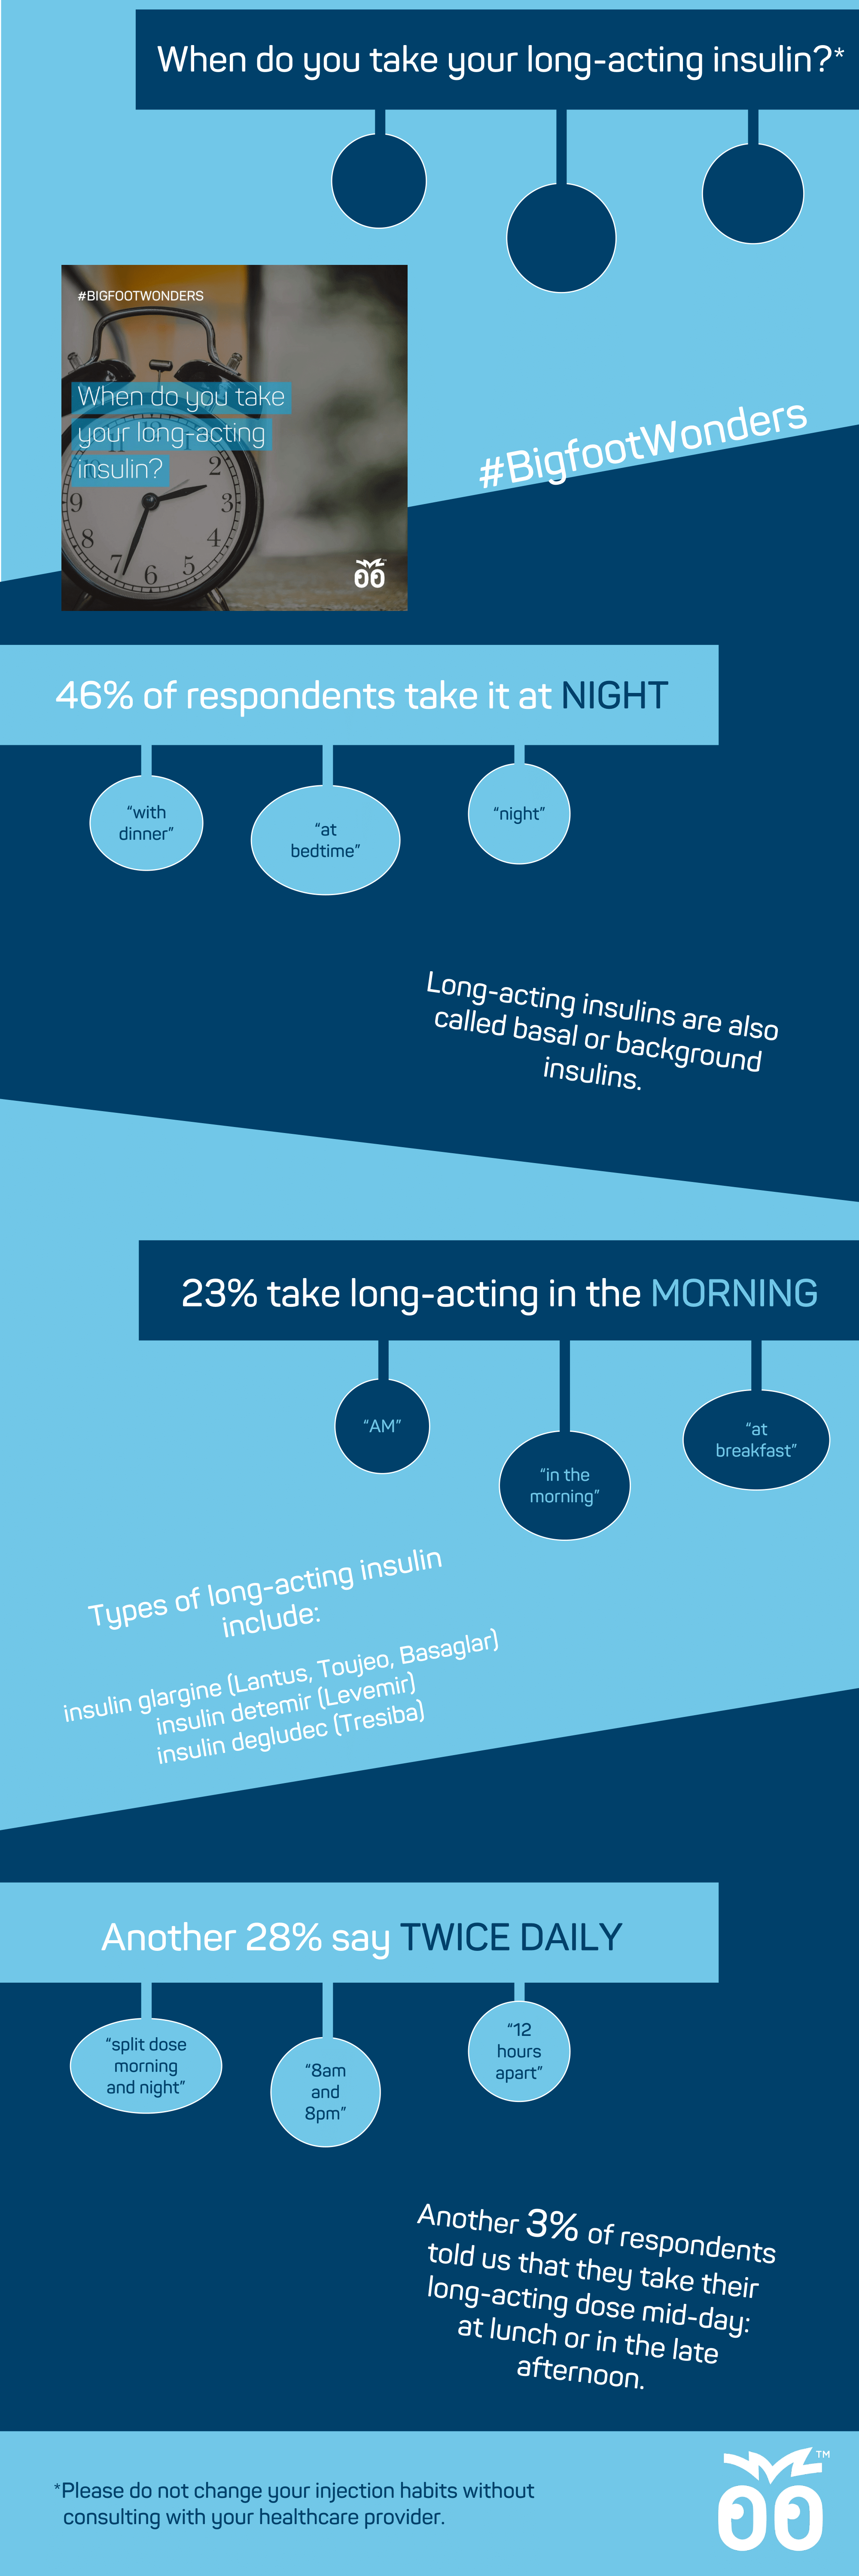 46% of respondents take their long-acting insulin at night, 23% report taking it in the mornings, and 28% split their dose into twice daily injections.